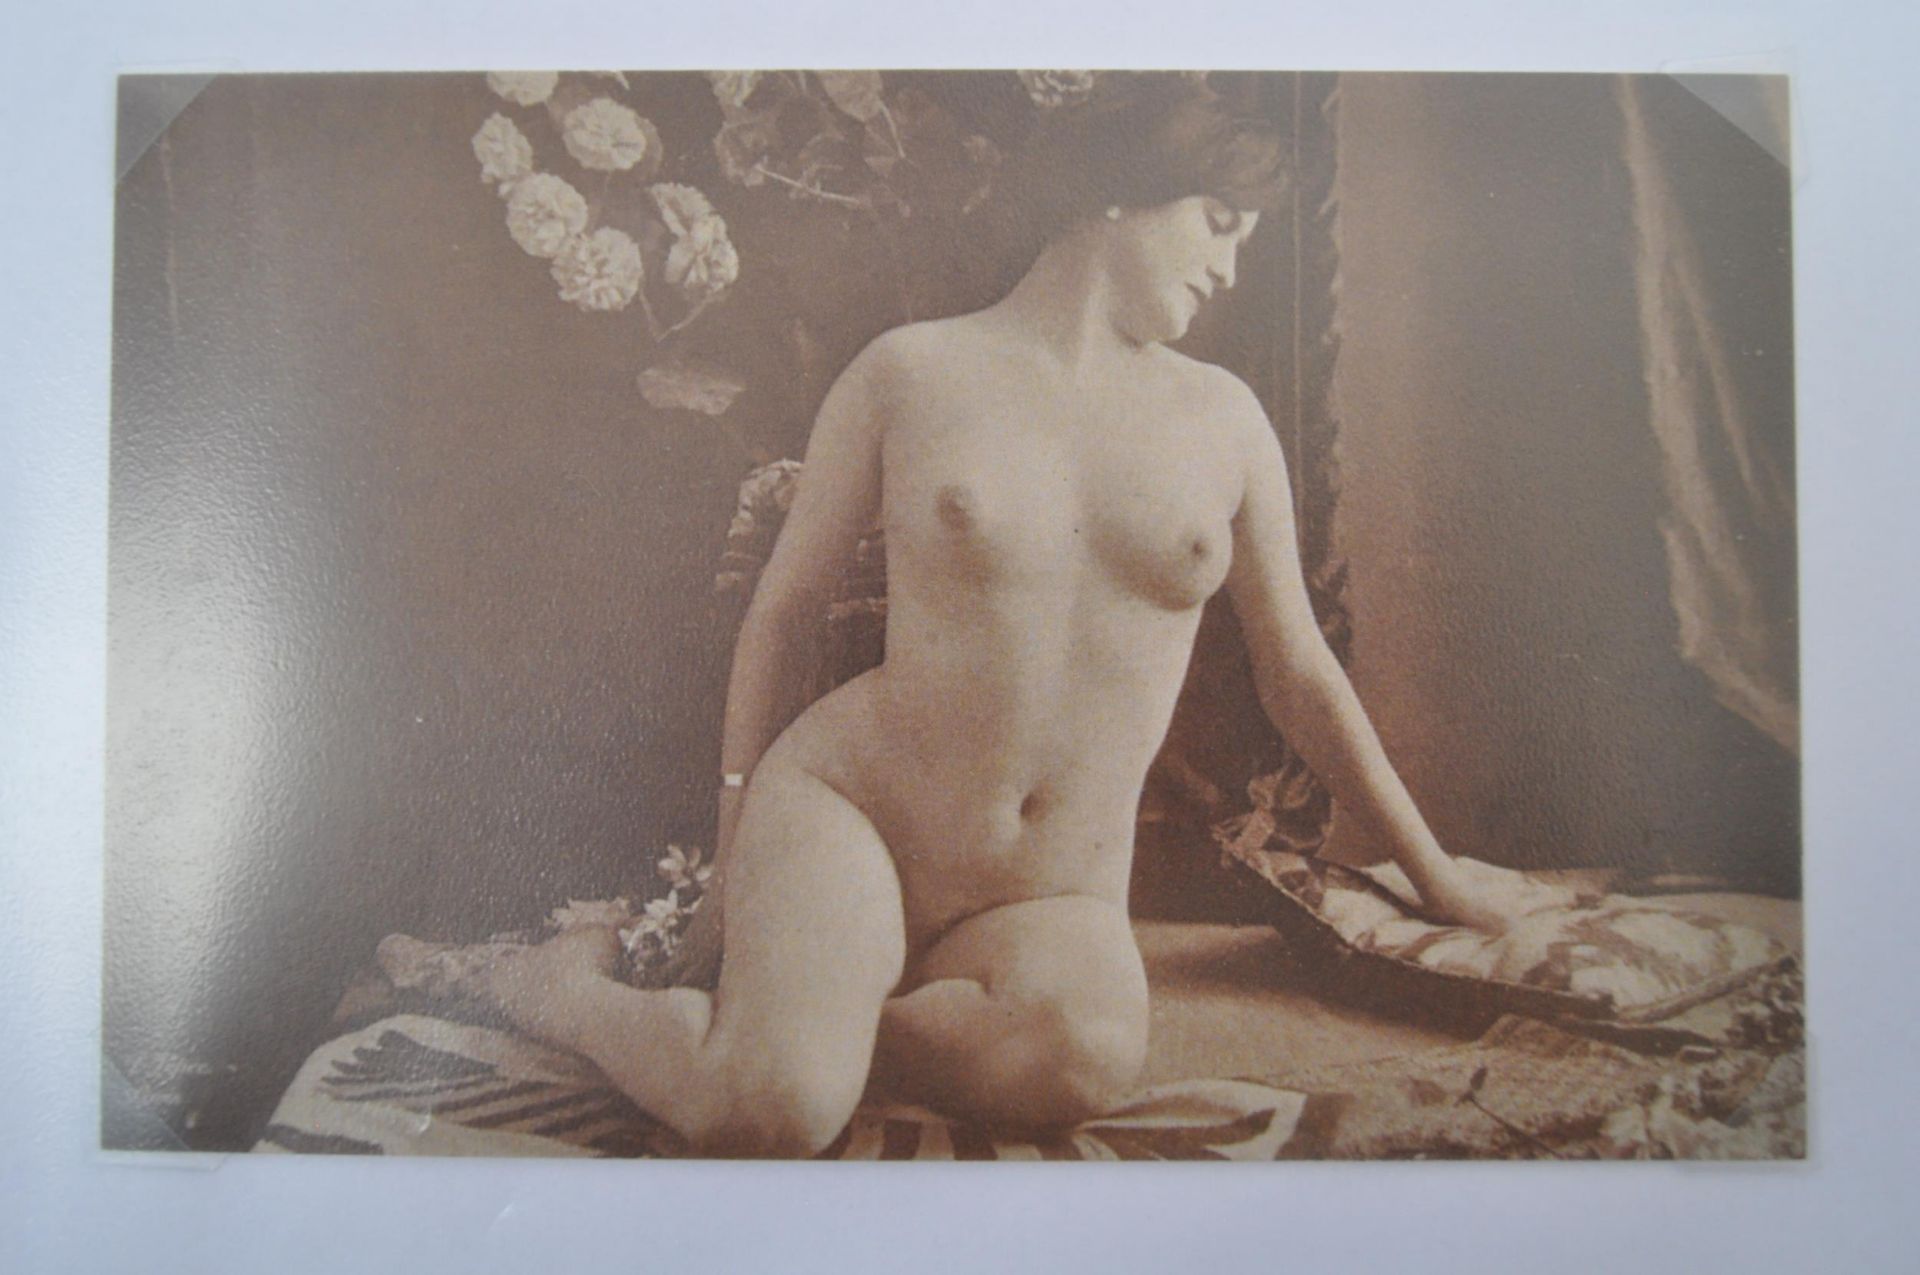 COLLECTION OF 20TH CENTURY FRENCH EROTIC NUDE POSTCARDS - Image 5 of 7